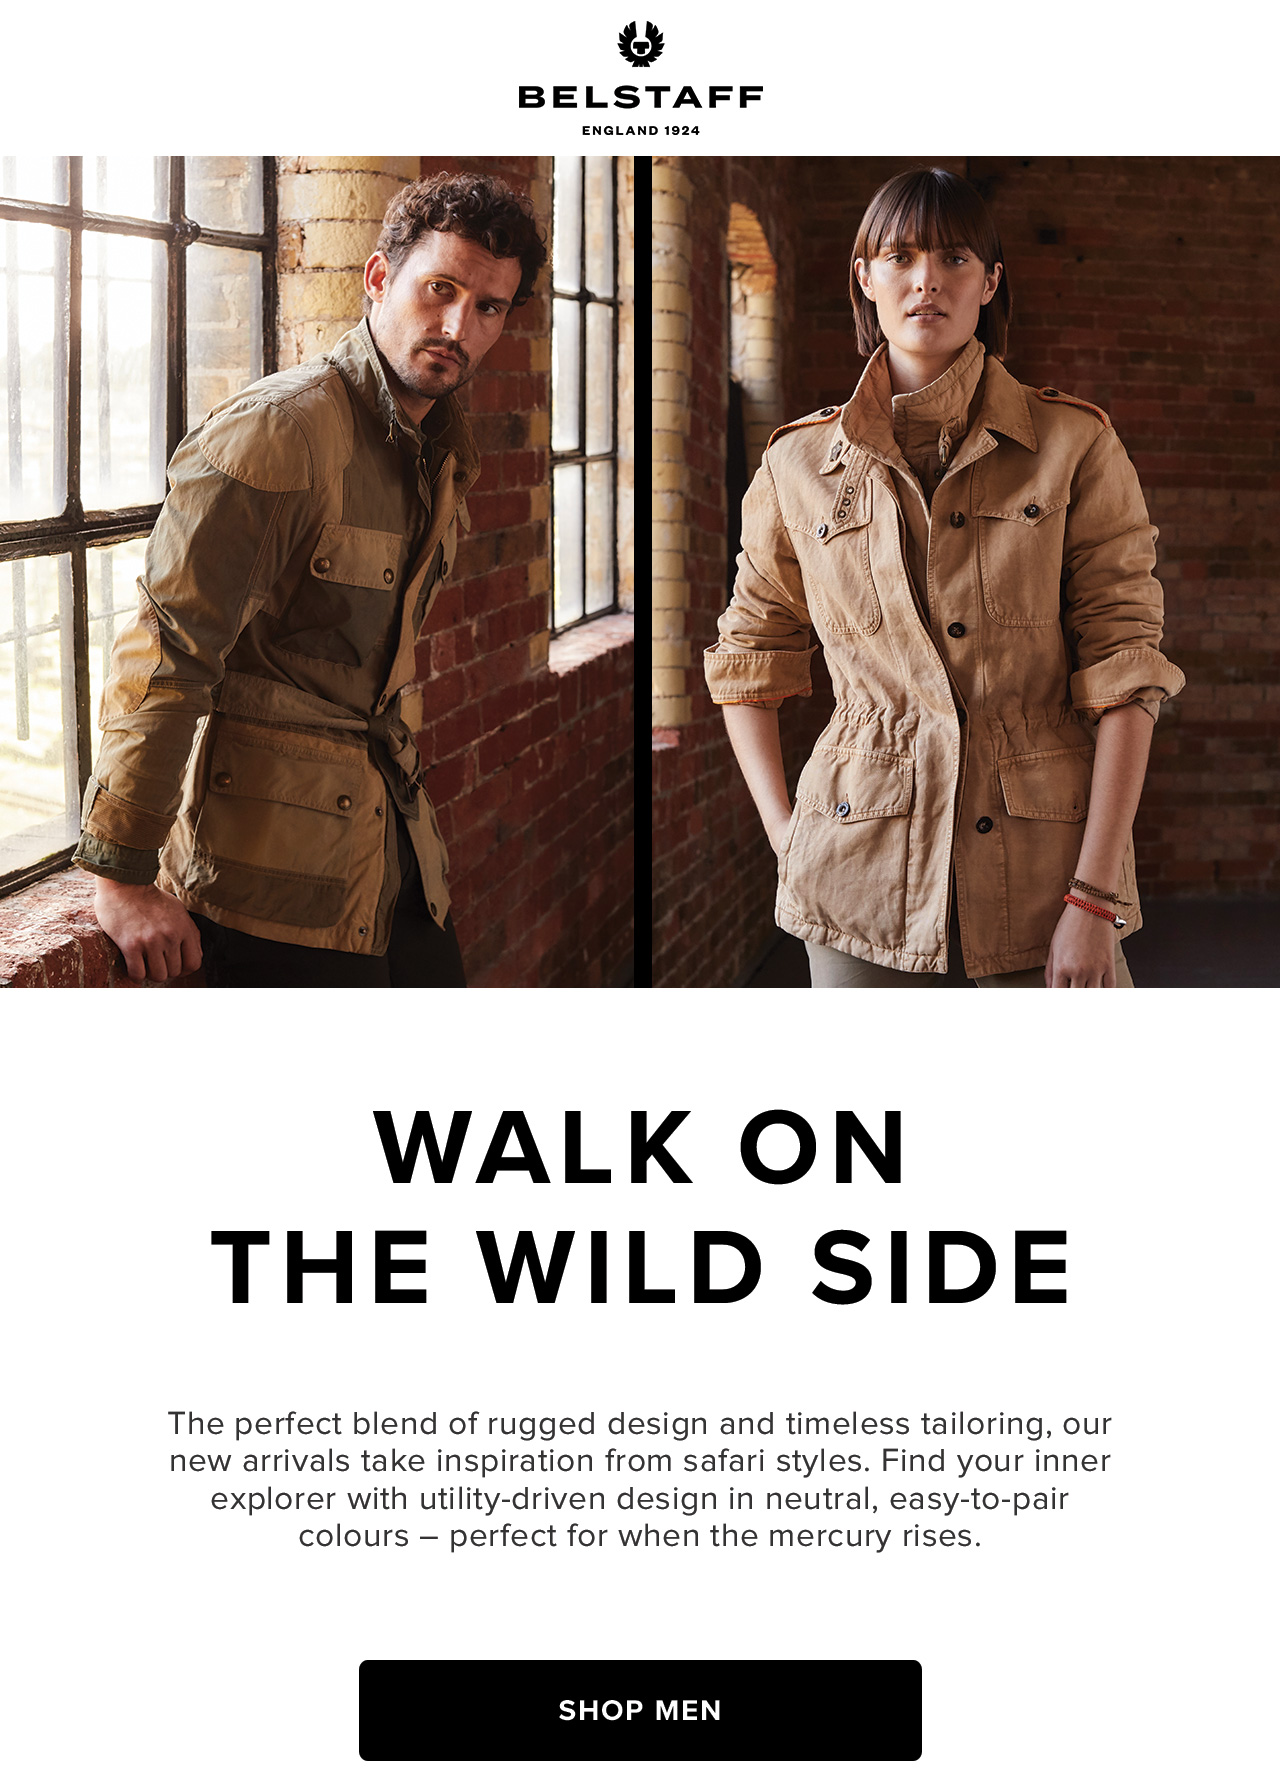 The perfect blend of rugged design and timeless tailoring, our new arrivals take inspiration from safari styles. 